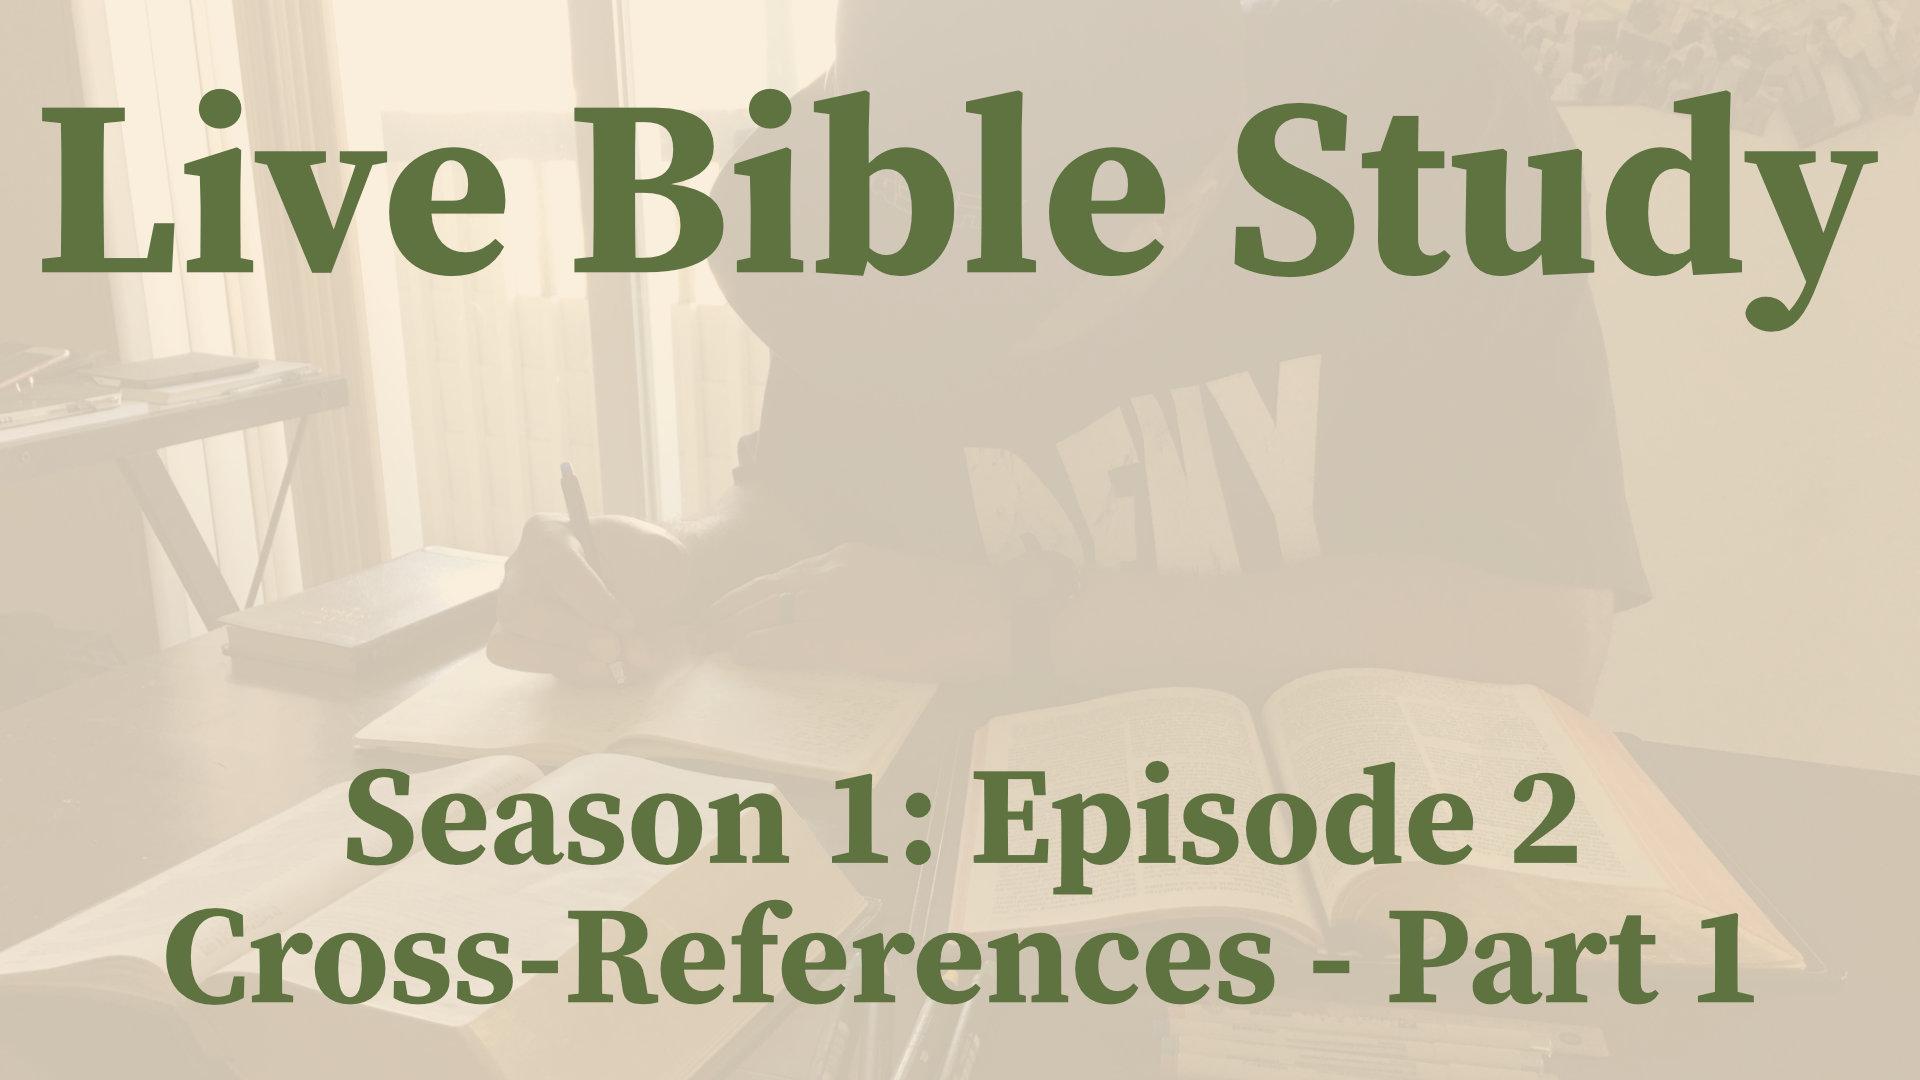 Cross-References – Part 1 (S1: Episode 2)